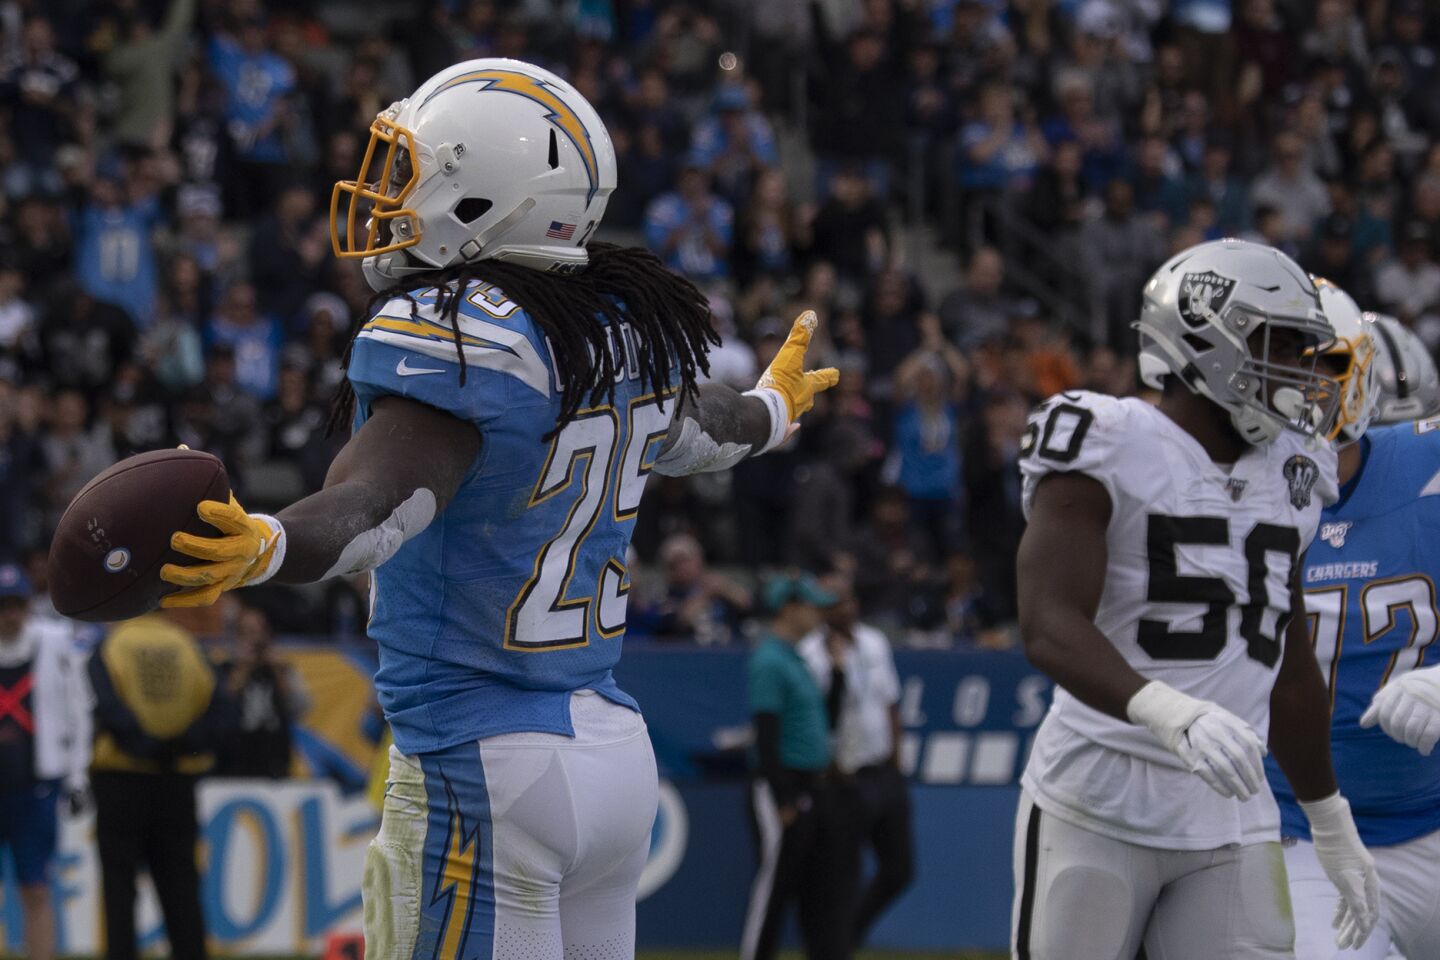 Chargers running back Melvin Gordon celebrates after scoring a touchdown against the Oakland Raiders.